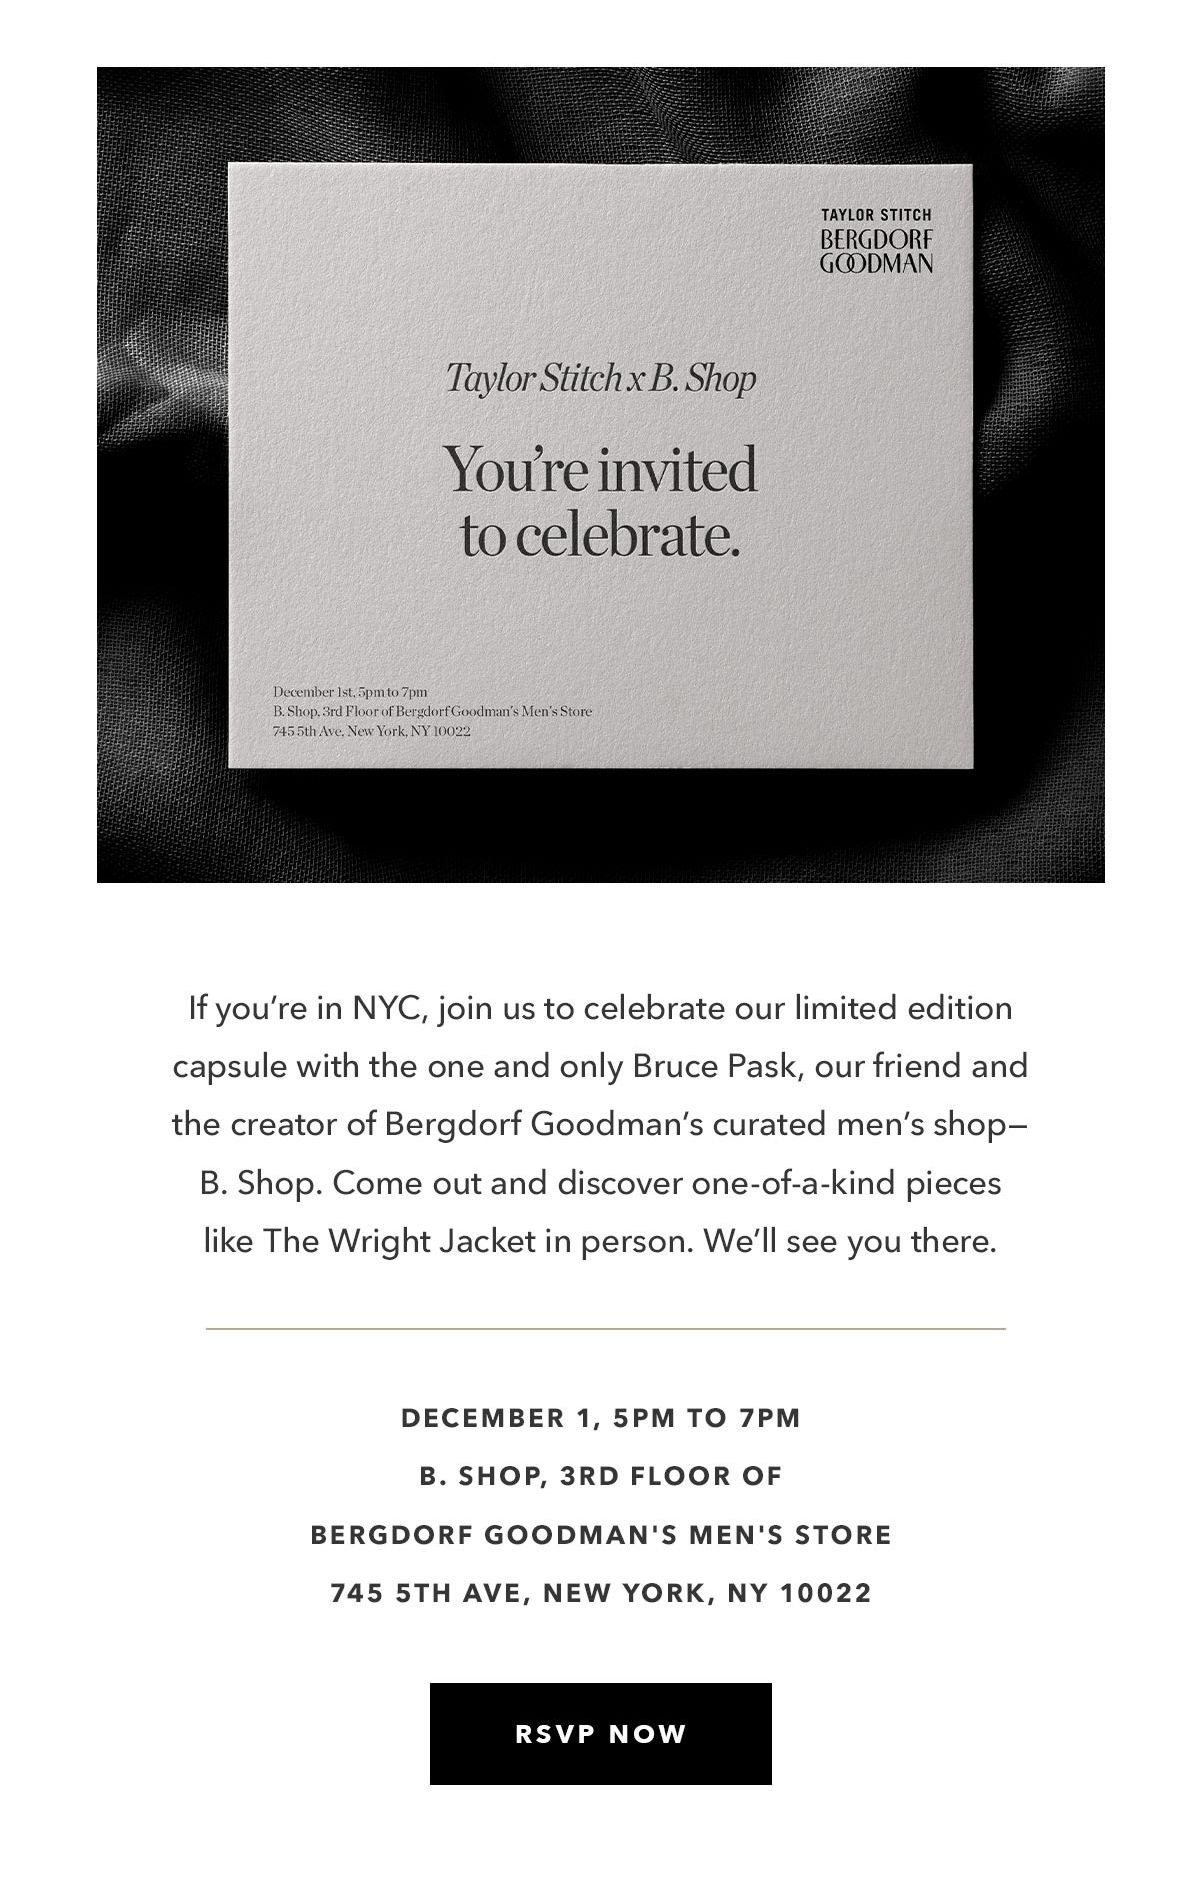 If you’re in NYC, join us to celebrate our limited edition capsule with the one and only Bruce Pask, our friend and the creator of Bergdorf Goodman’s curated men’s shop—B. Shop. Come out and discover one-of-a-kind pieces like The Wright Jacket in person. We’ll see you there.